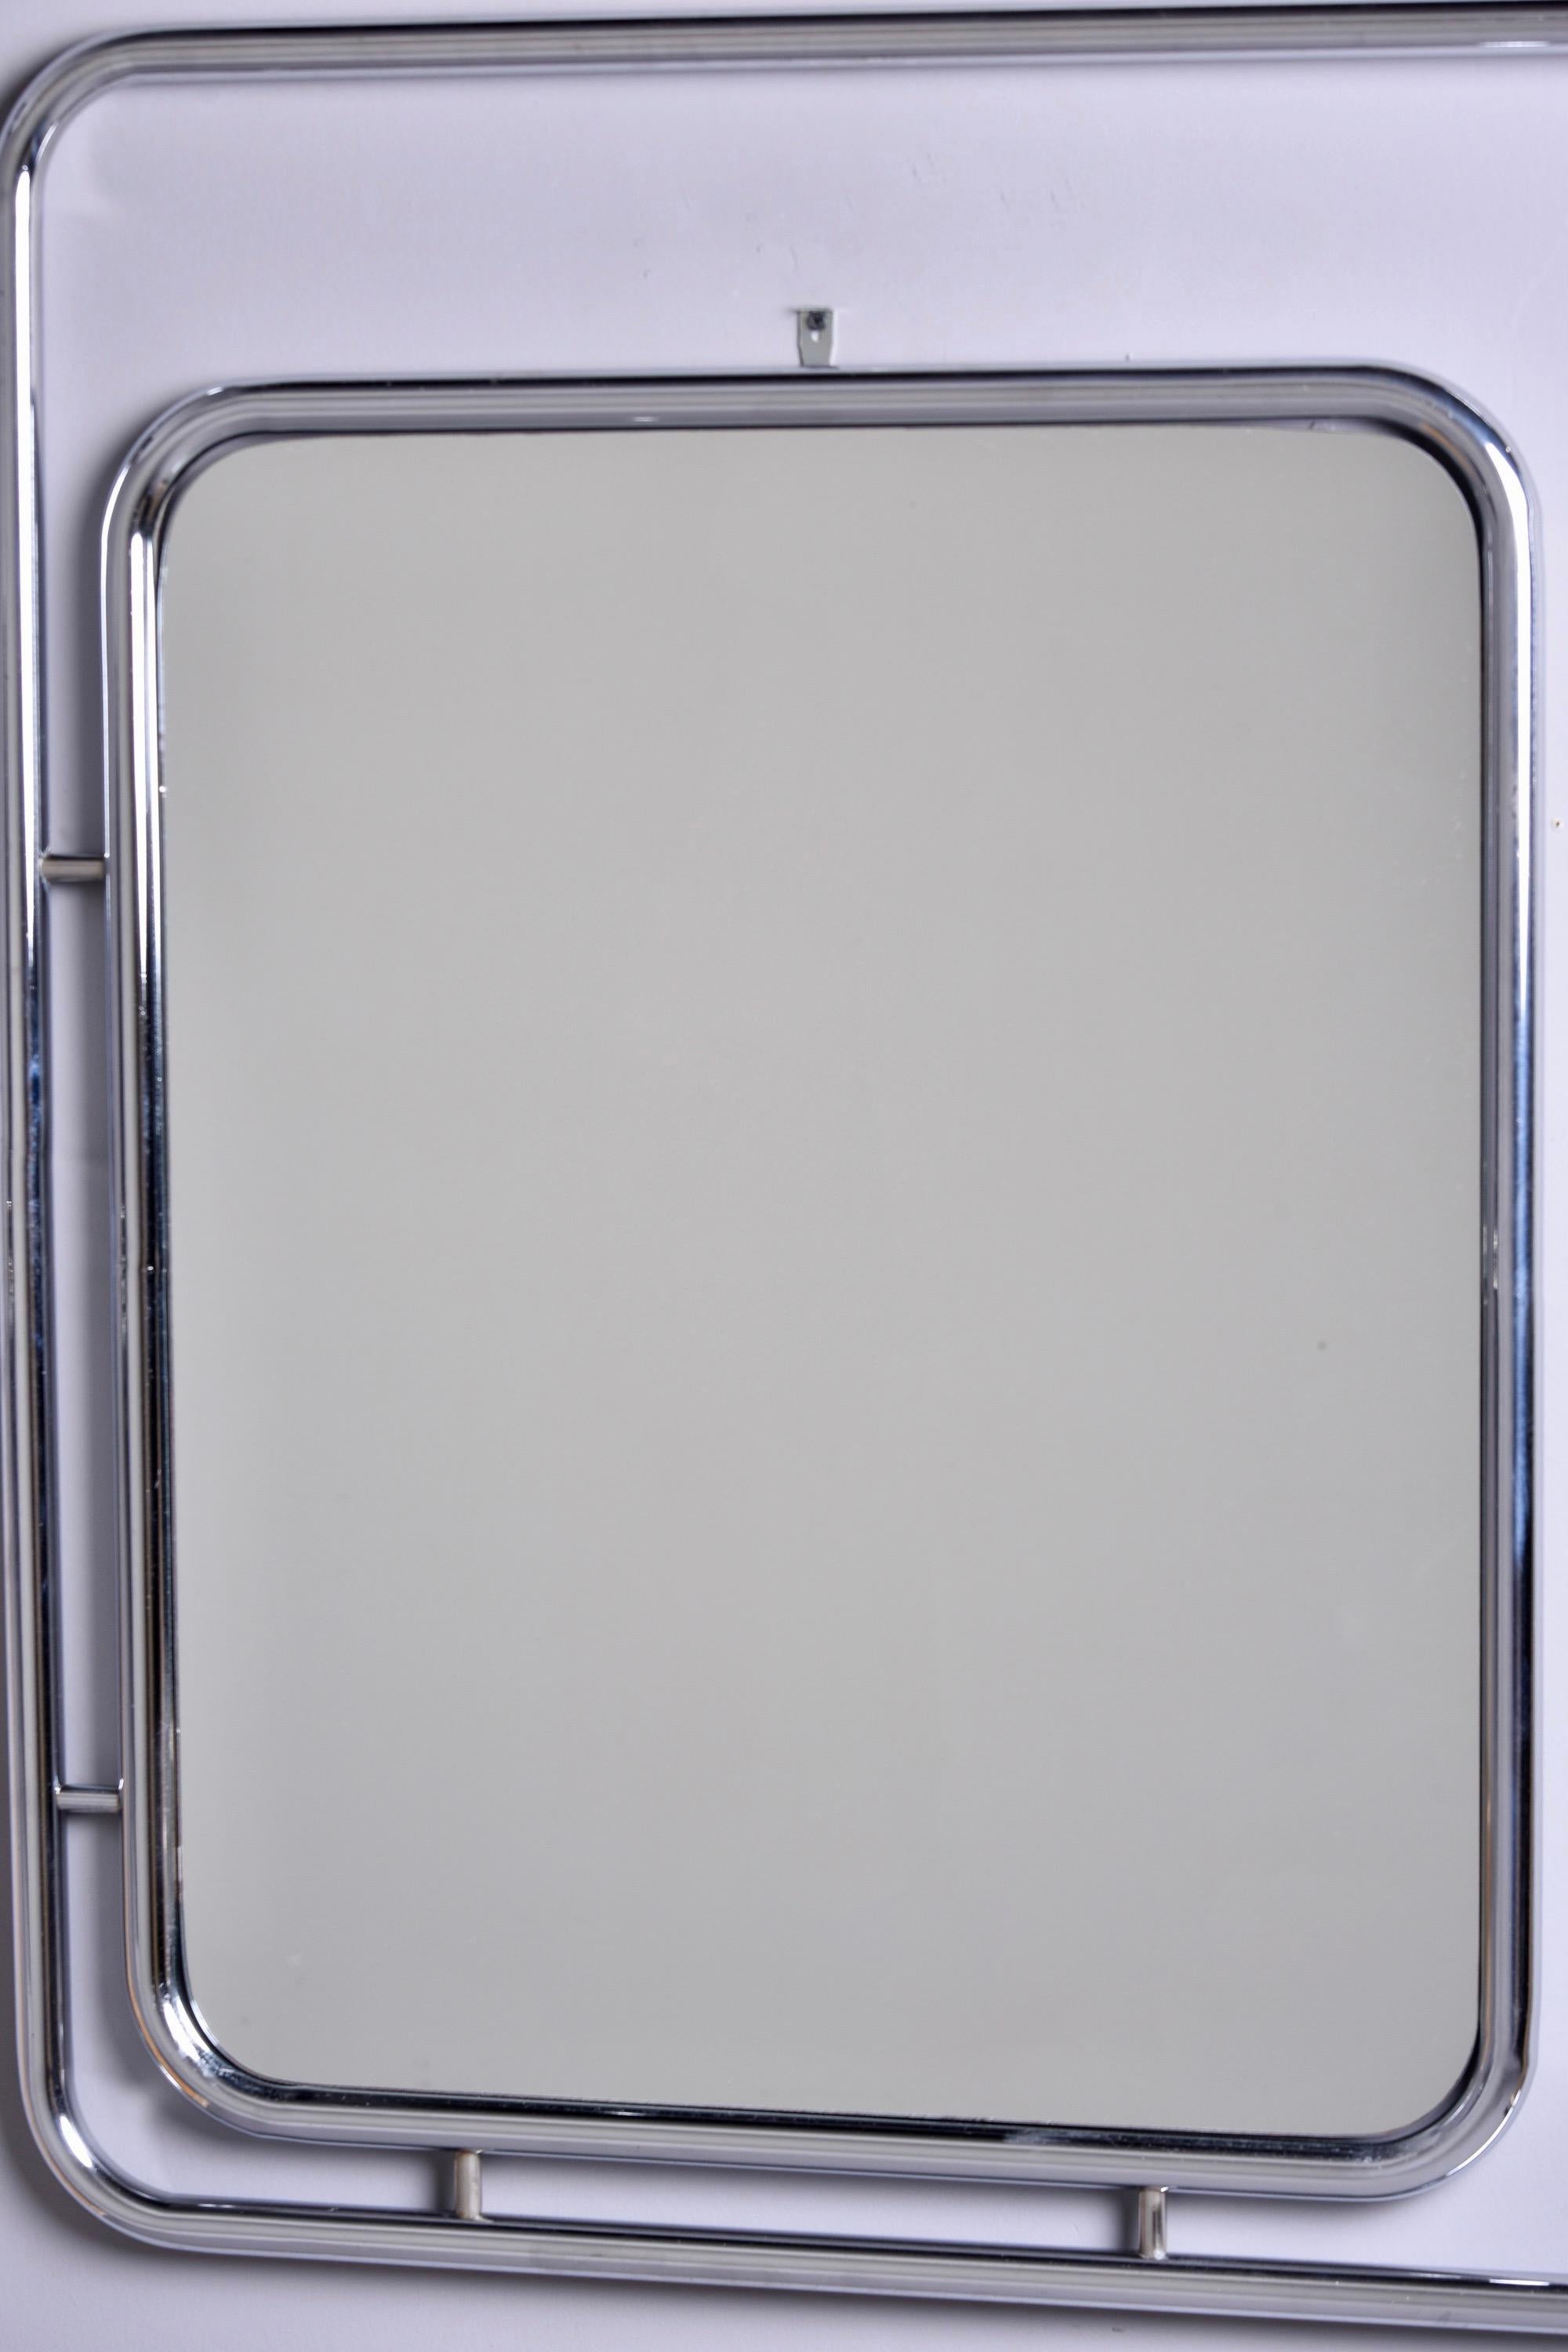 Italian Mid Century Chrome Trimmed Square Mirror Within Chrome Frame For Sale 1